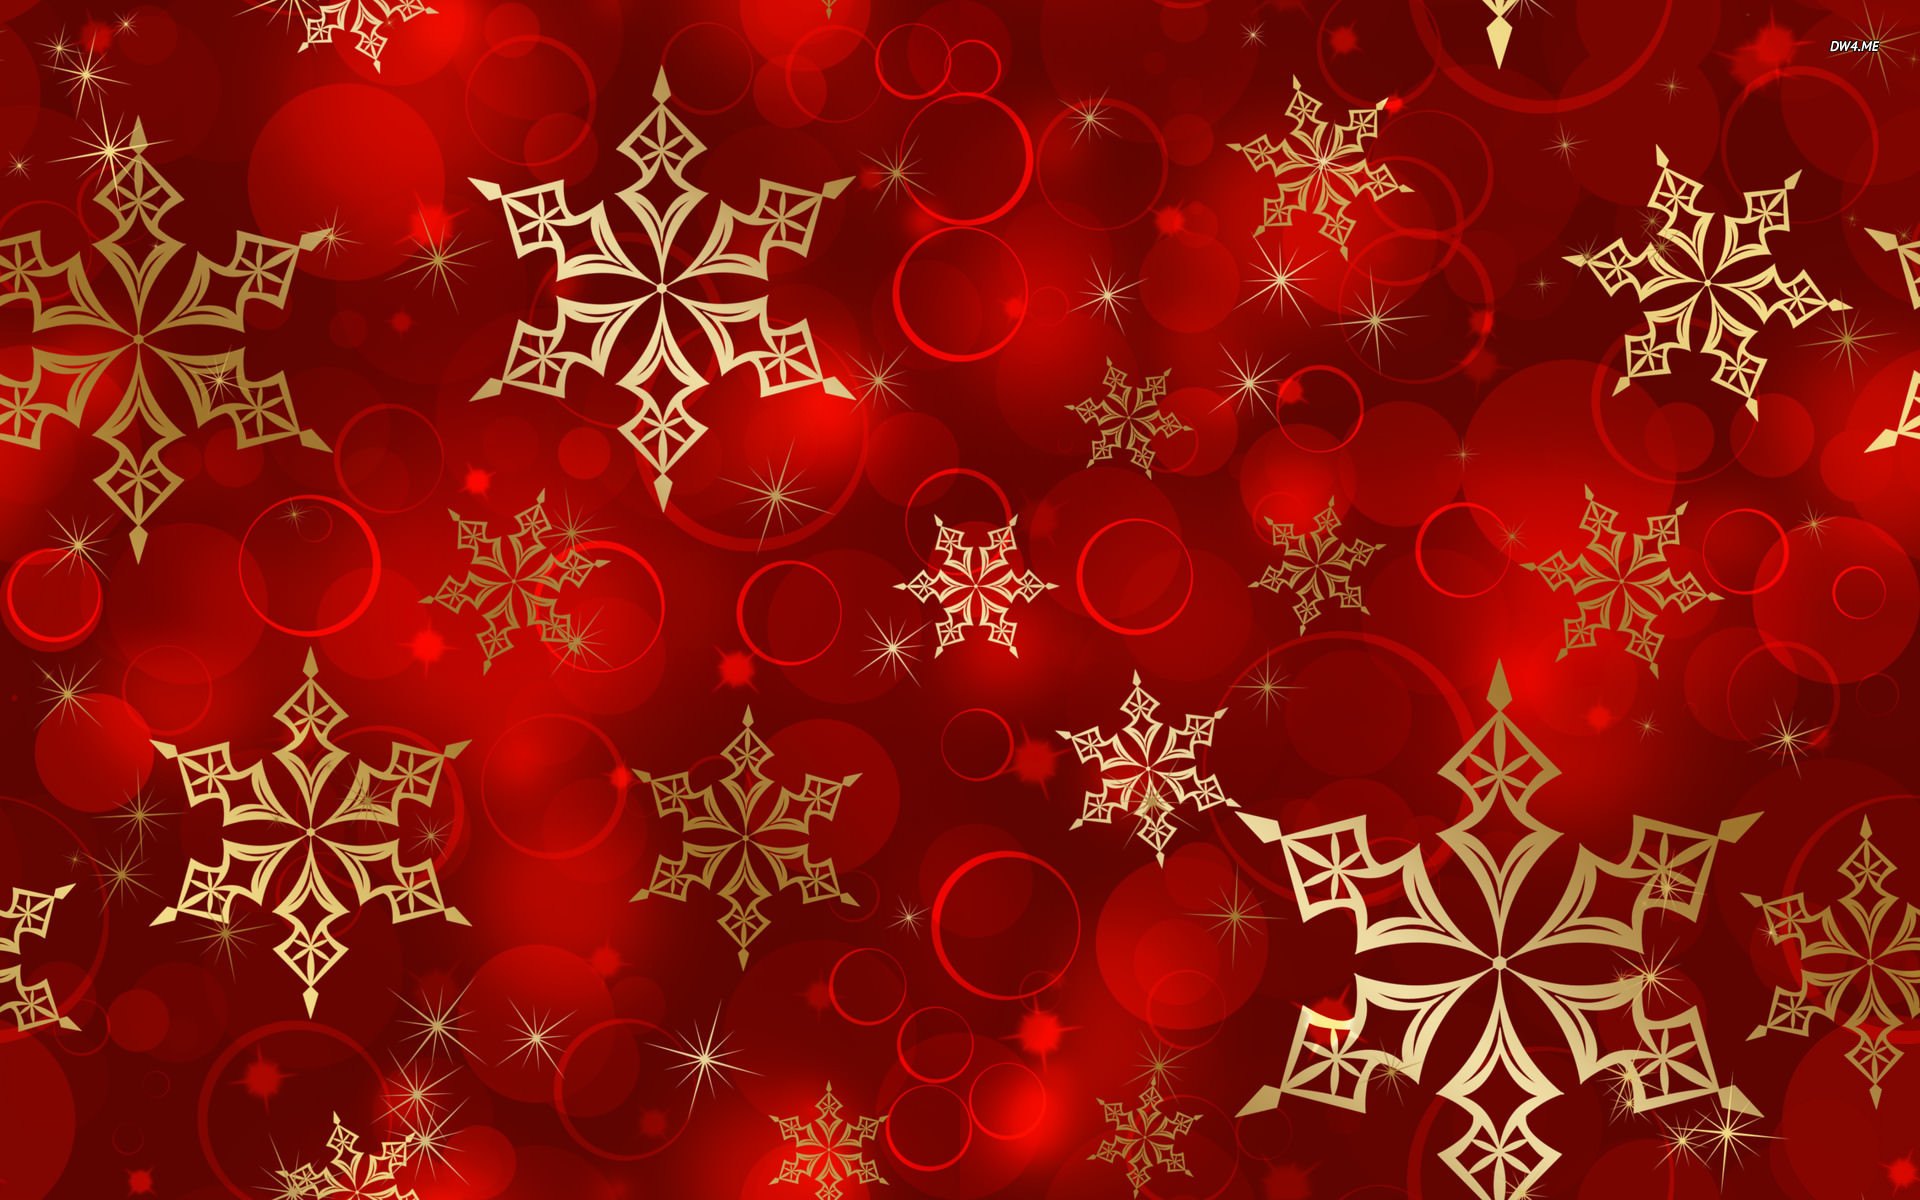 White And Gold Search Results - Red Christmas Wallpaper Snowflakes Red  Background - 1920x1200 Wallpaper 